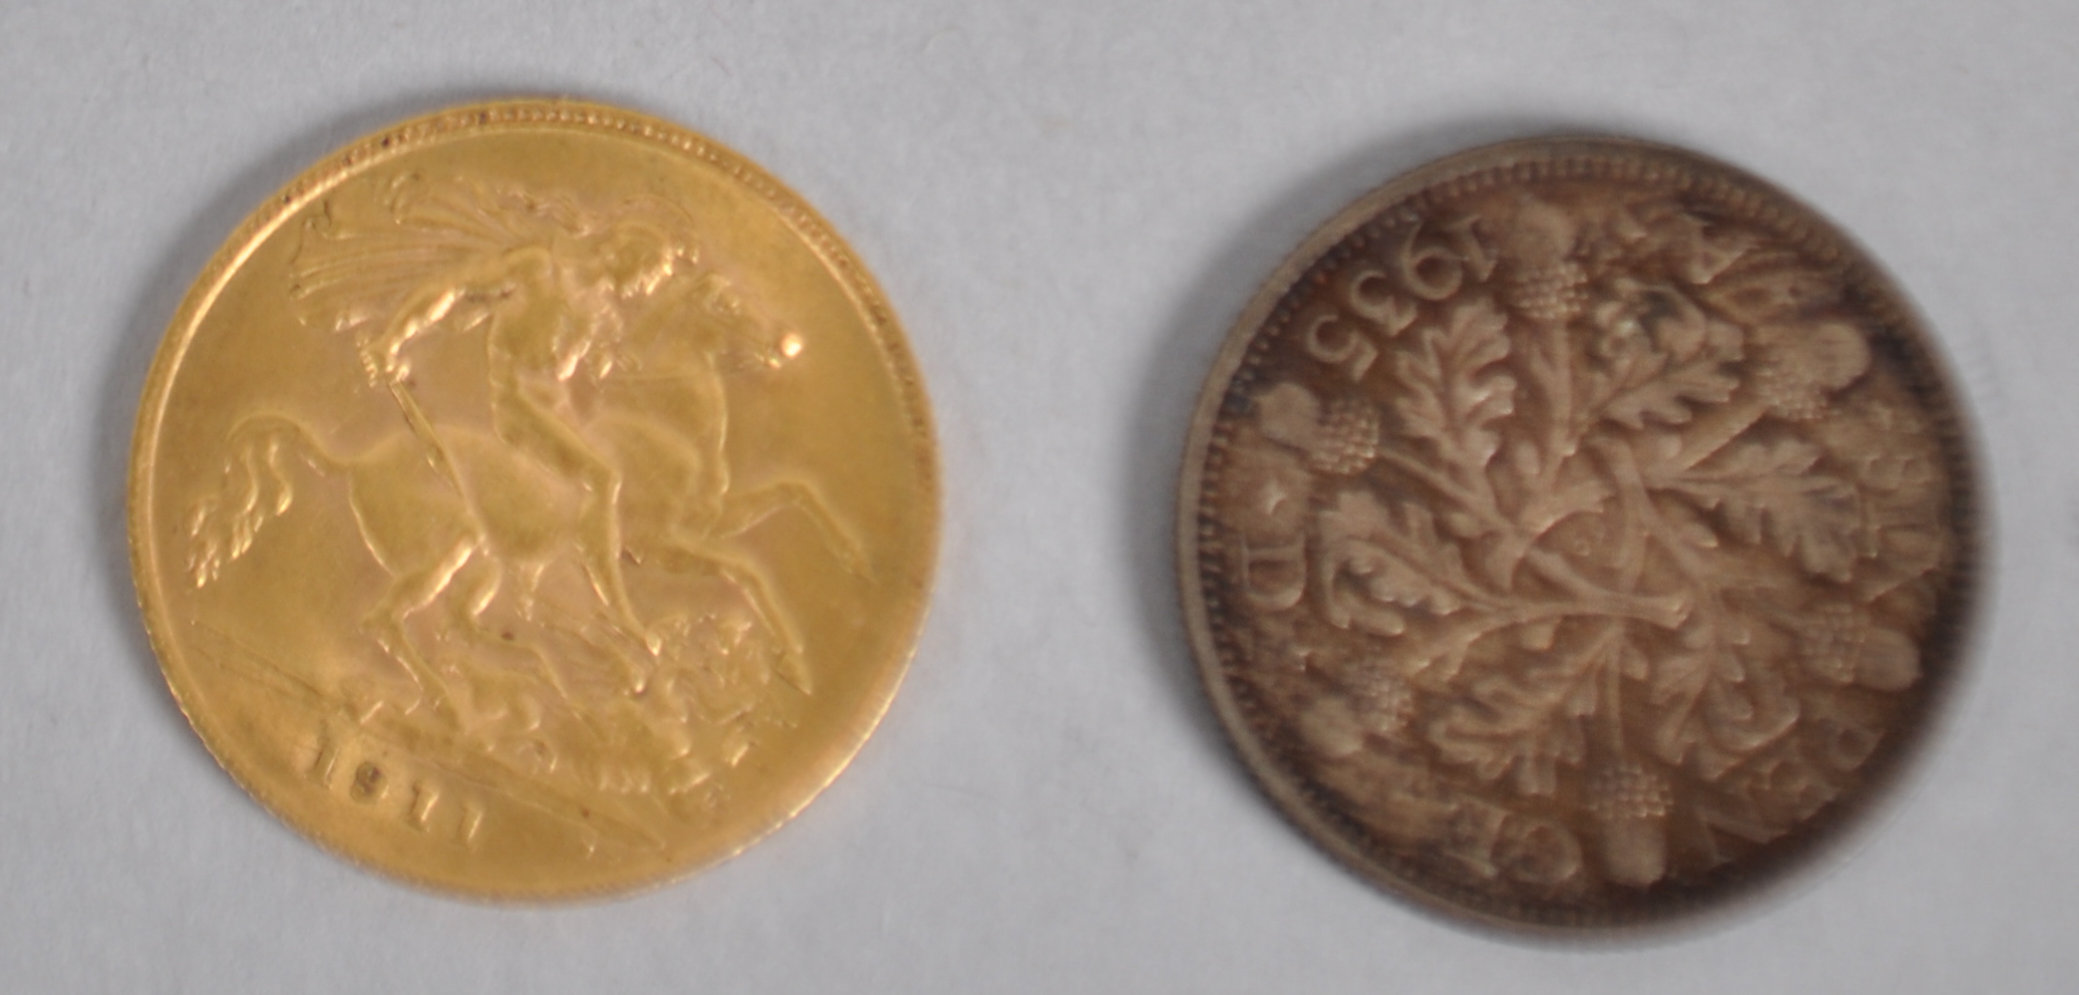 A half sovereign coin dated 1911 together with a silver sixpence coin dated 1935. - Image 2 of 3